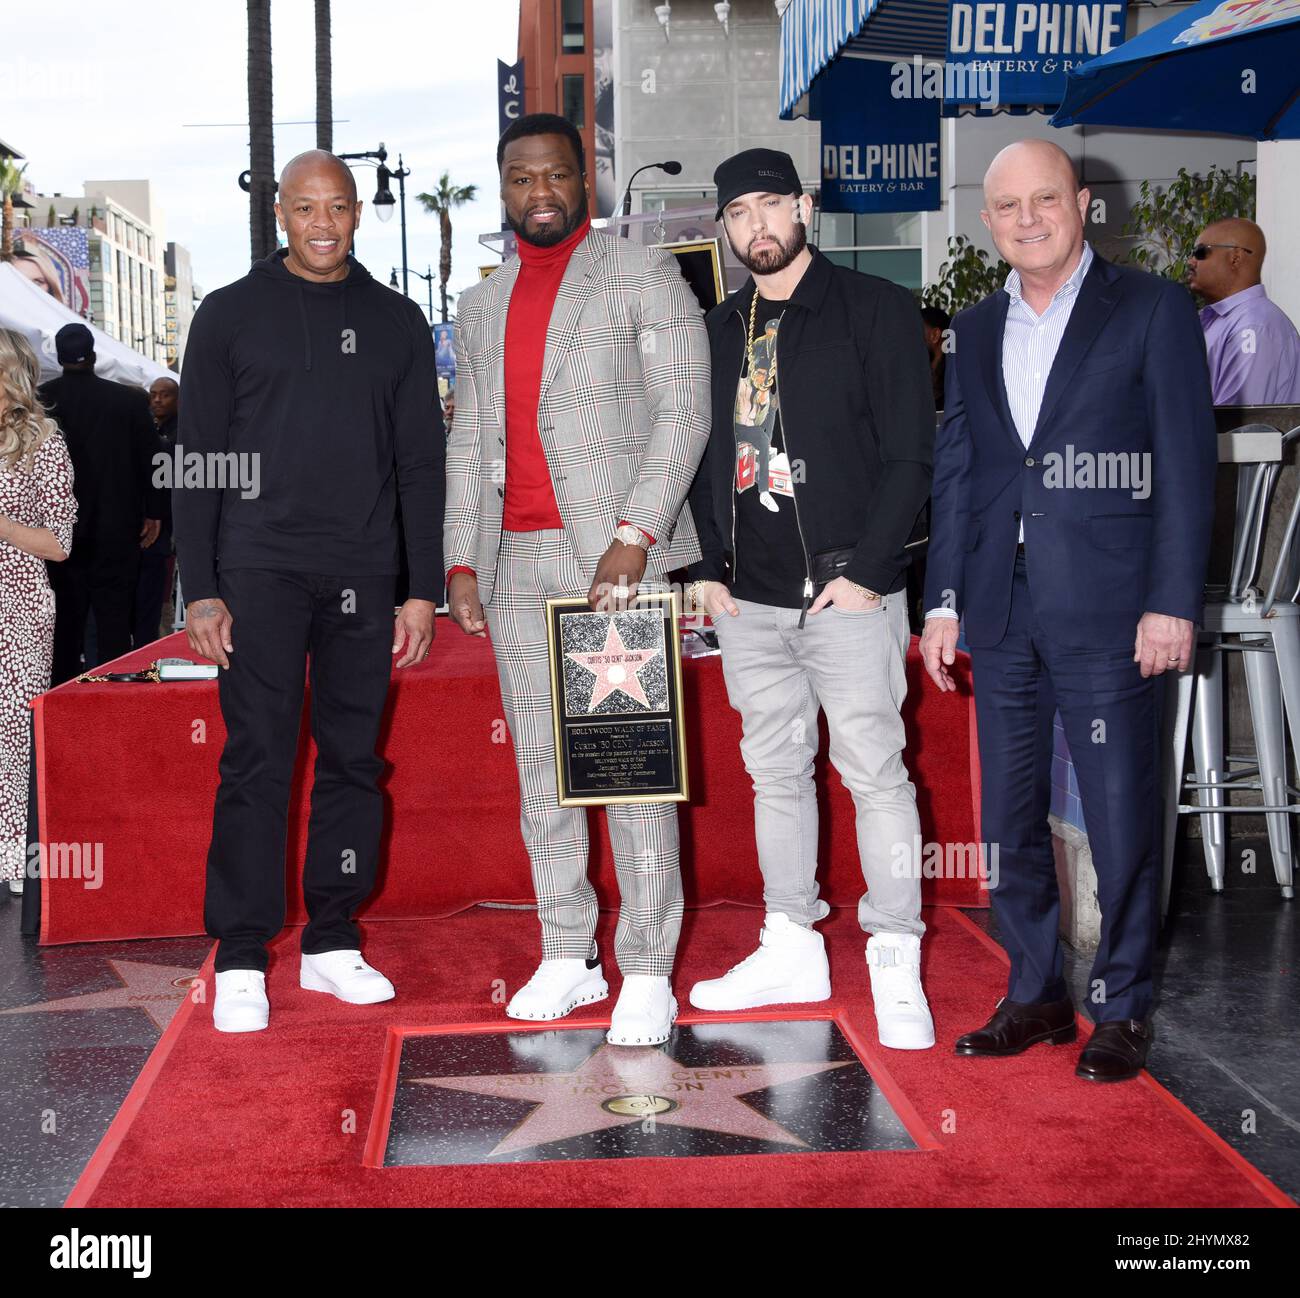 Curtis '50 Cent' Jackson, Dr Dre, Eminem and Chris Albrecht is joined by Dr Dre, Eminem and Chris Albrecht at his Hollywood Walk of Fame star ceremony on January 30, 2020 in Hollywood, CA. Stock Photo